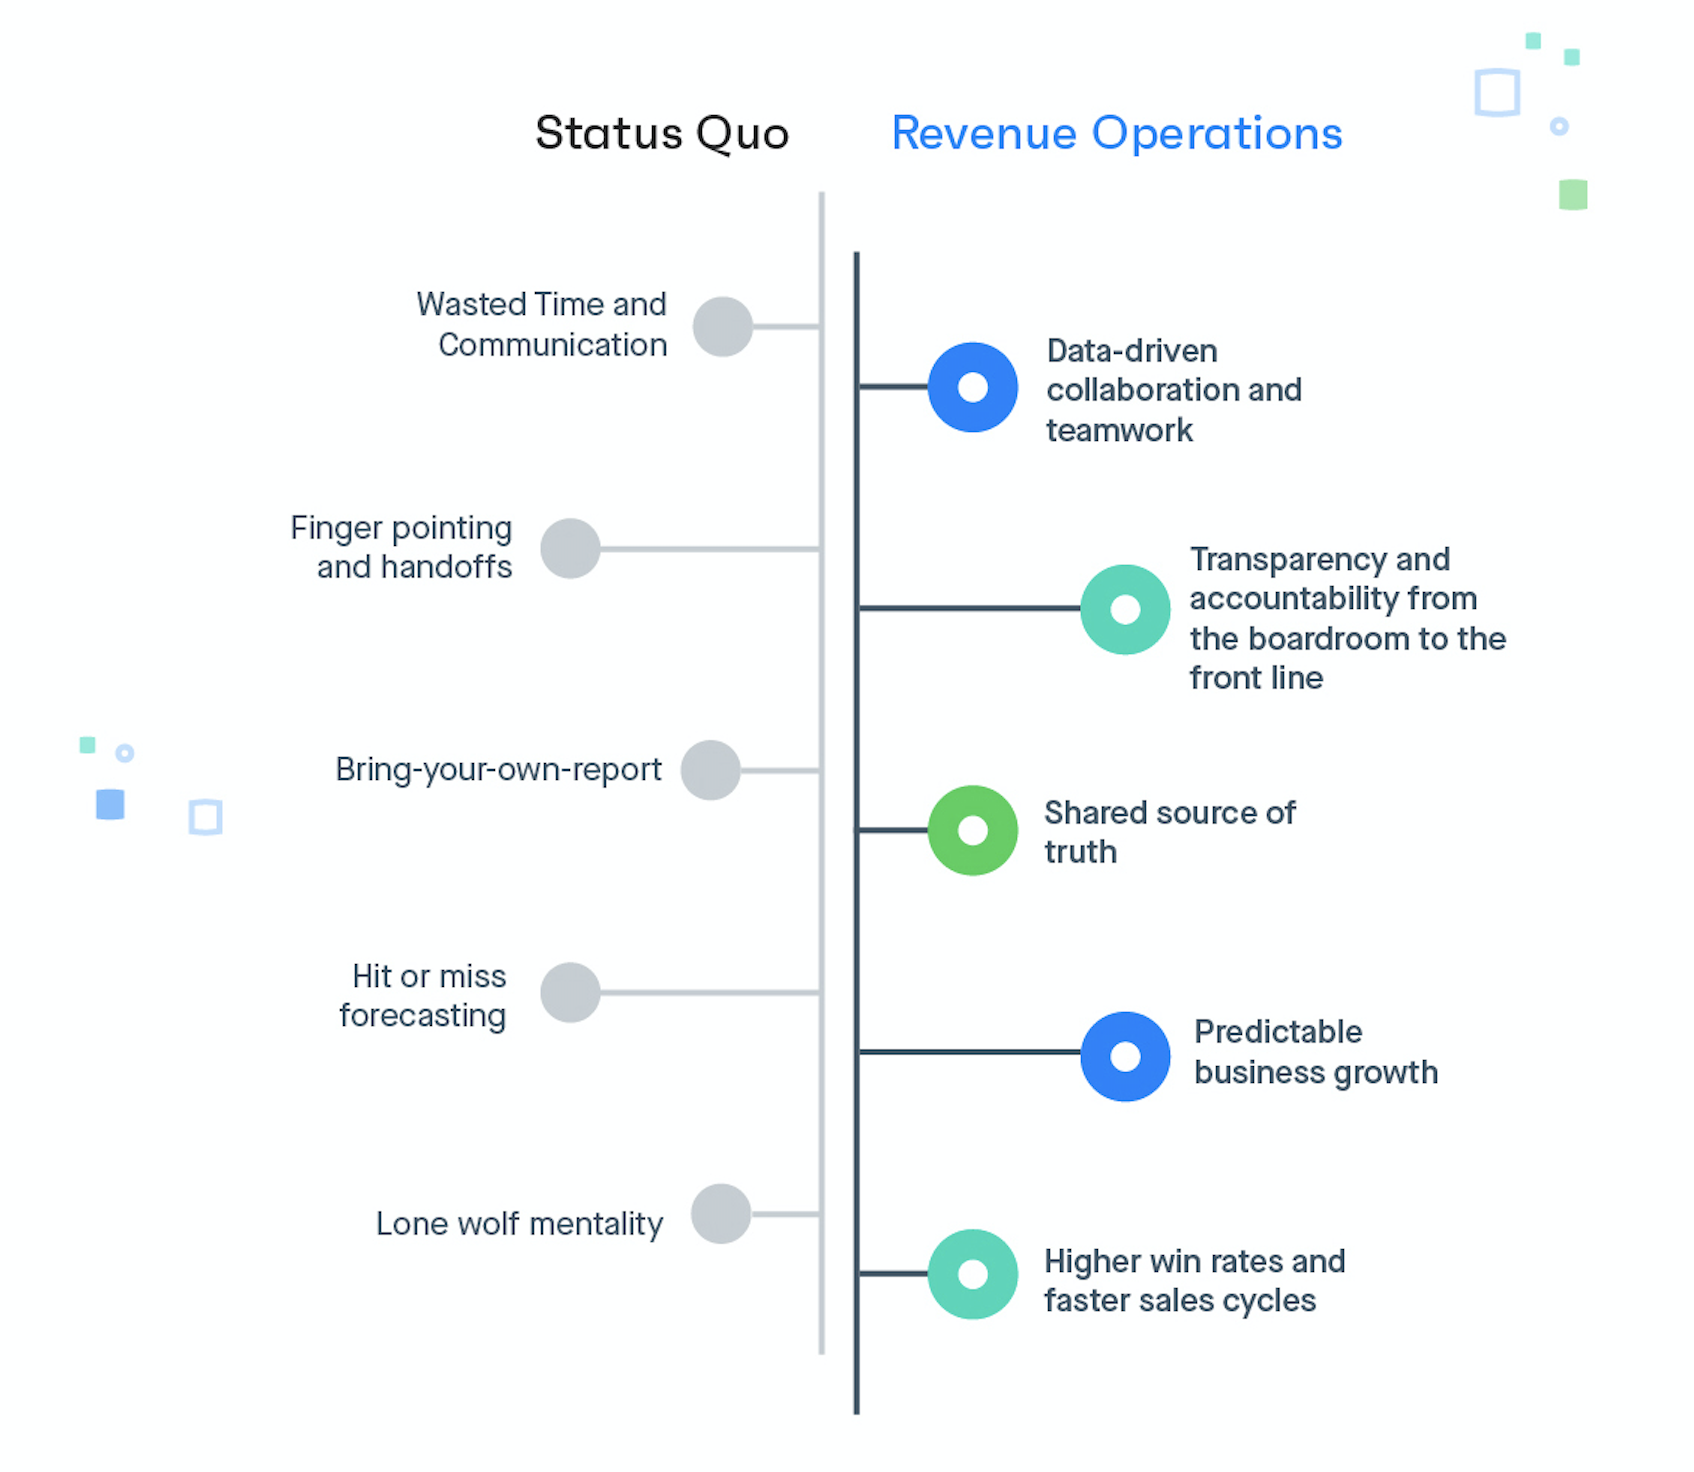 The Benefits of Revenue Operations